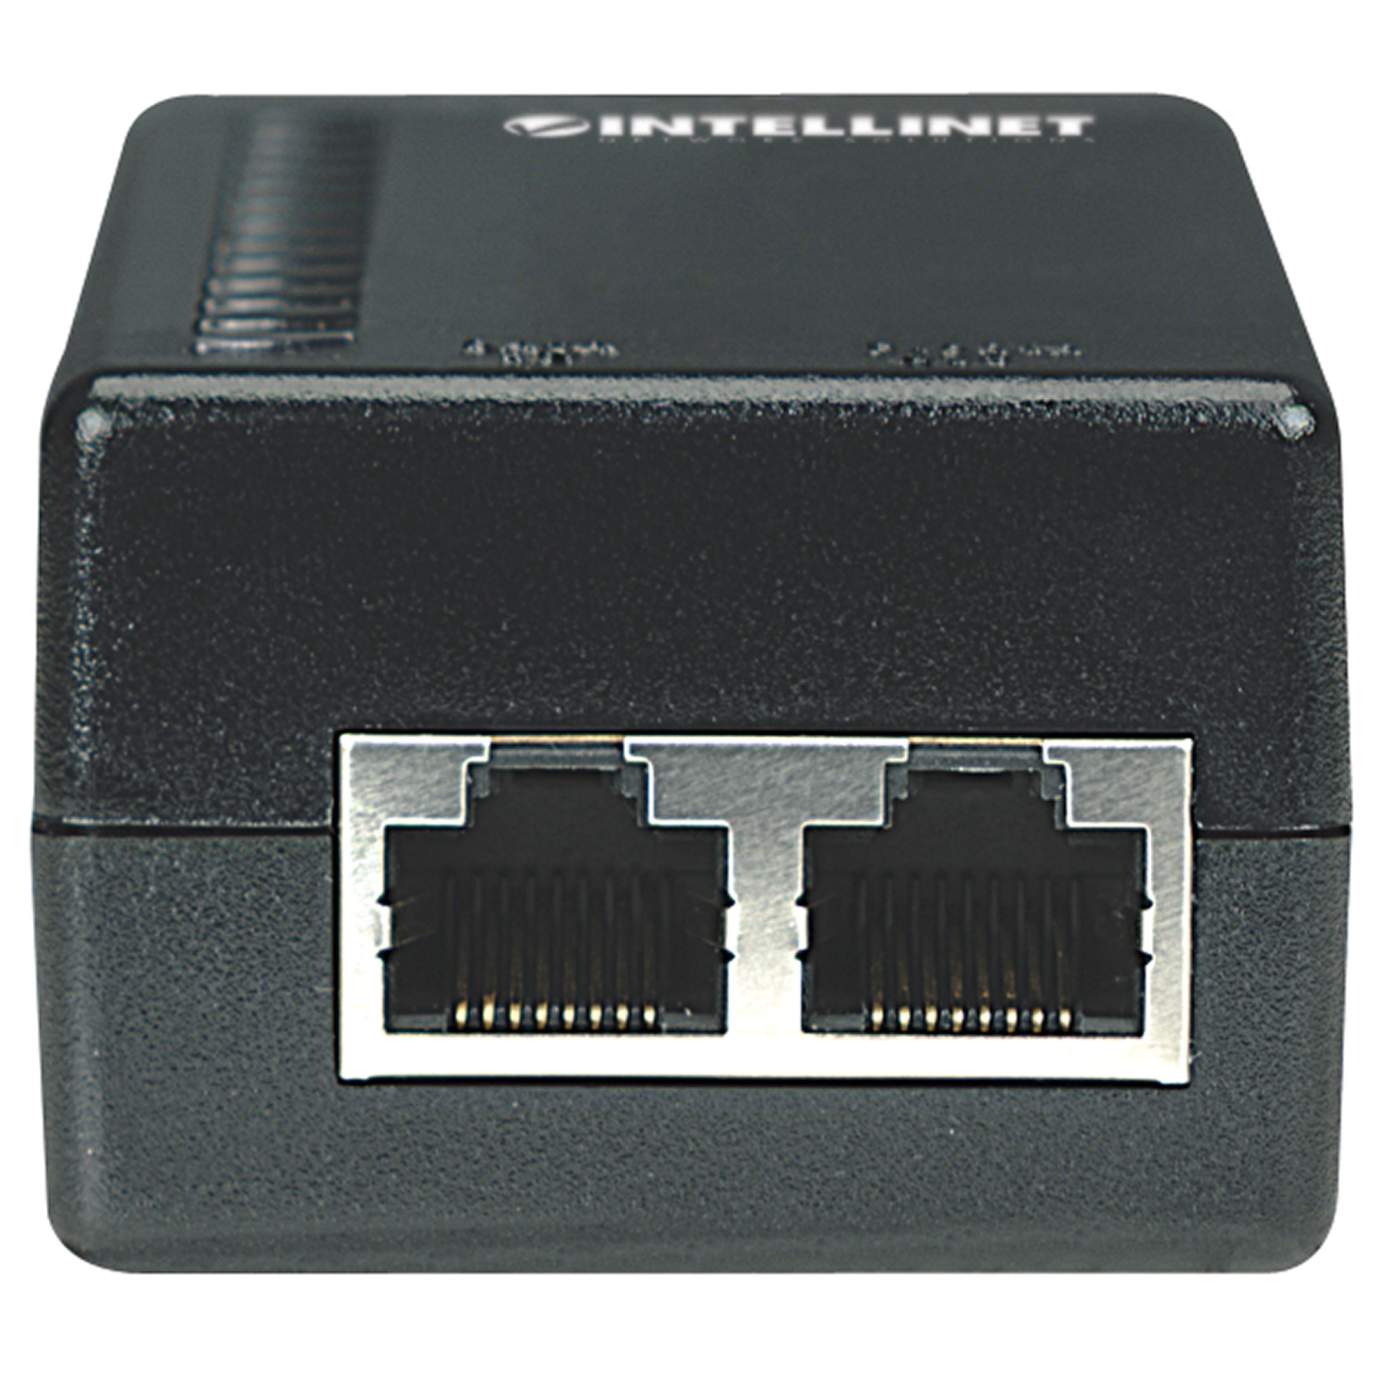 Power over Ethernet (PoE) Injector, overloaded circuits poe 